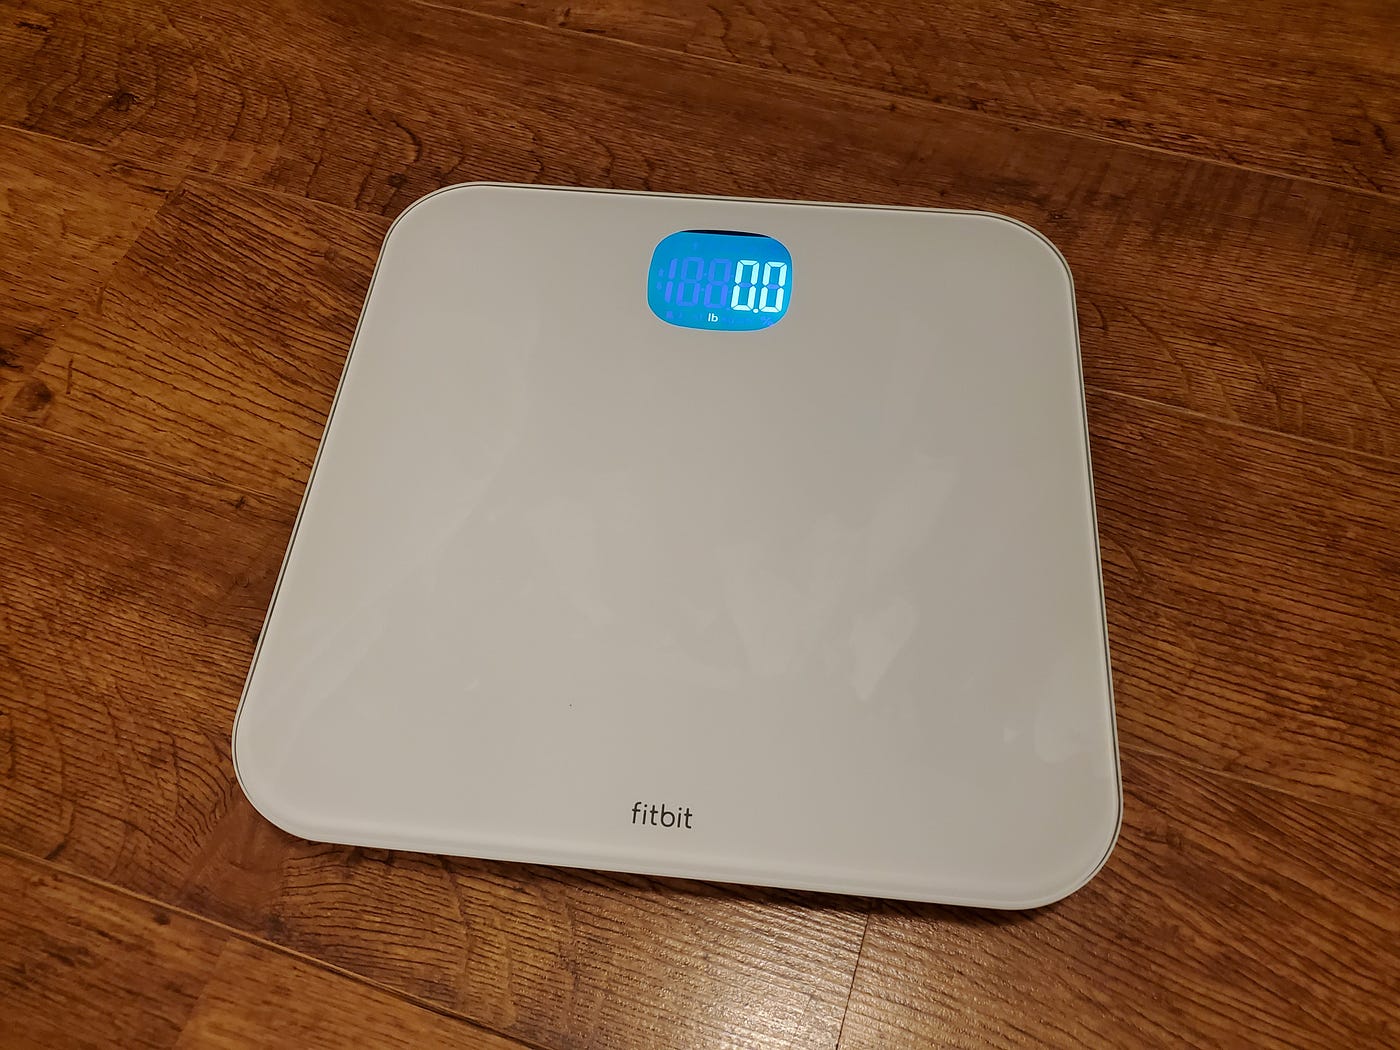 Review of the Fitbit Aria Air Scale | by Thomas Smith | DIY Life Tech